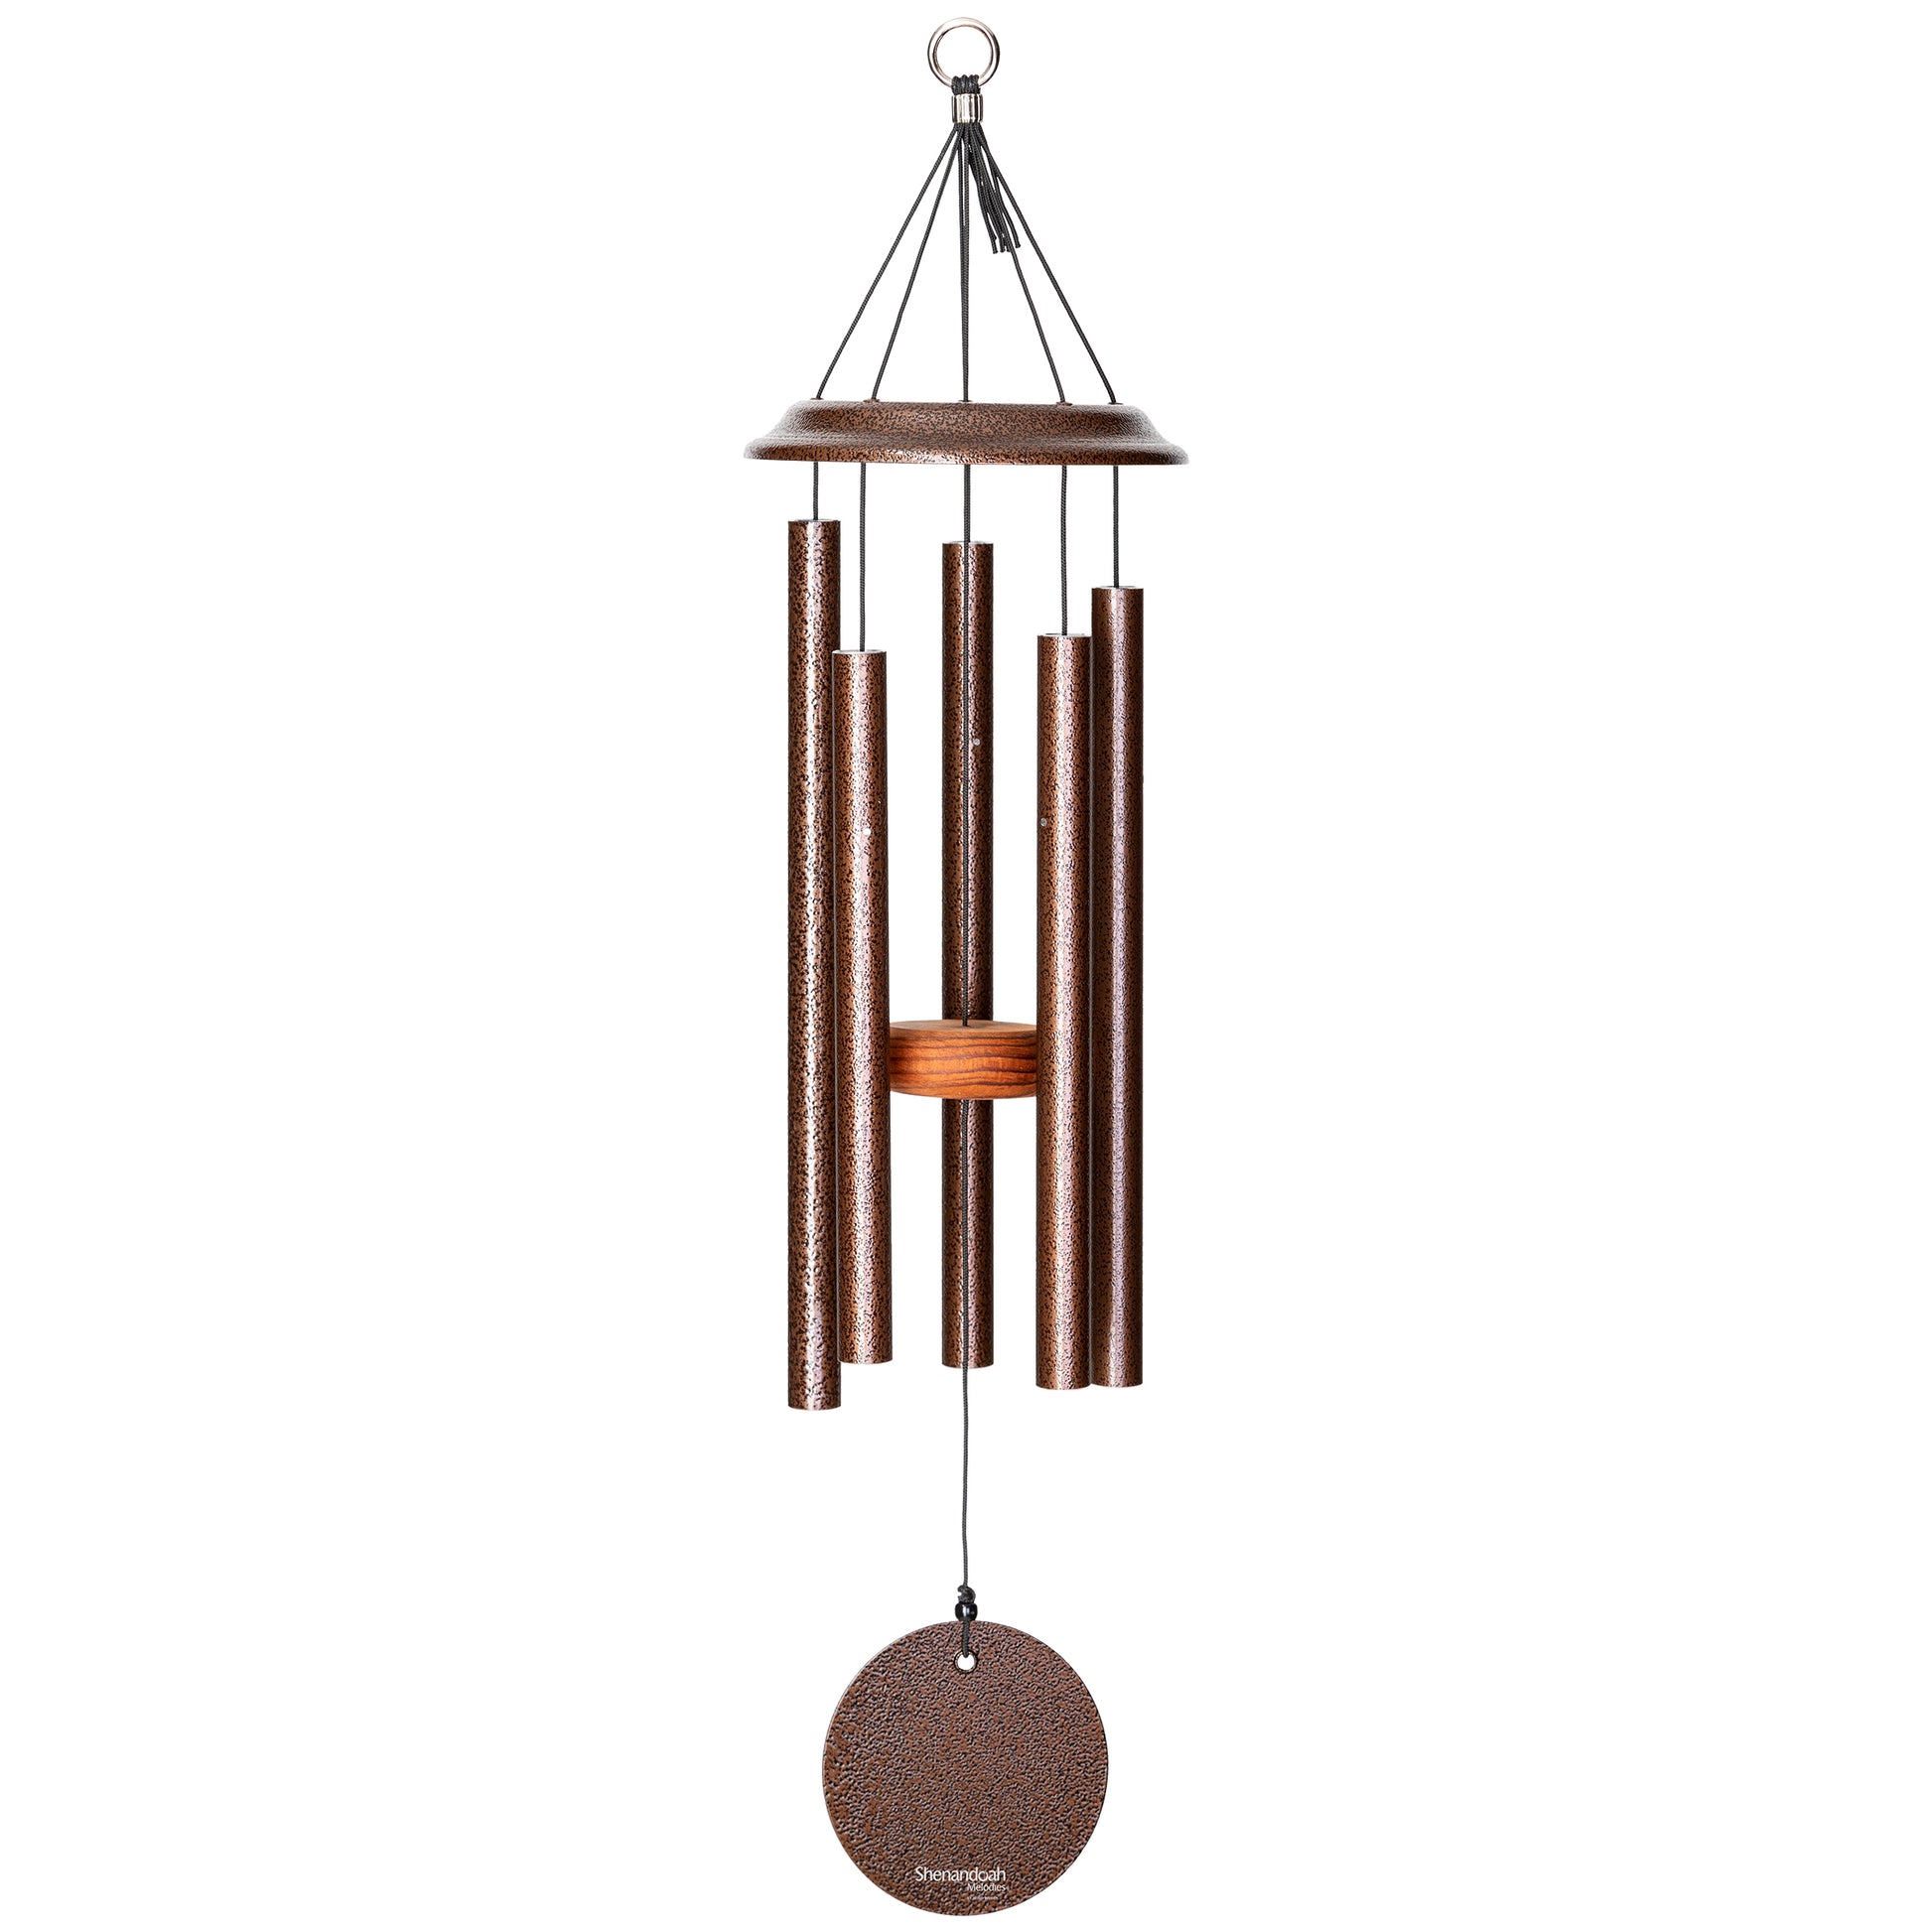 These Copper Vein Wind River Shenandoah Melodies wind chimes from Home and Garden Treasures are crafted with six hollow tubes of varying sizes suspended from a central ring, creating enchanting melodies as they dance in the breeze. Complete with a stylish round metal sail that catches gentle winds, each Shenandoah Melodies exemplifies the calming song of the Virginia countryside. Elevate your garden retreat with the perfect gift today!